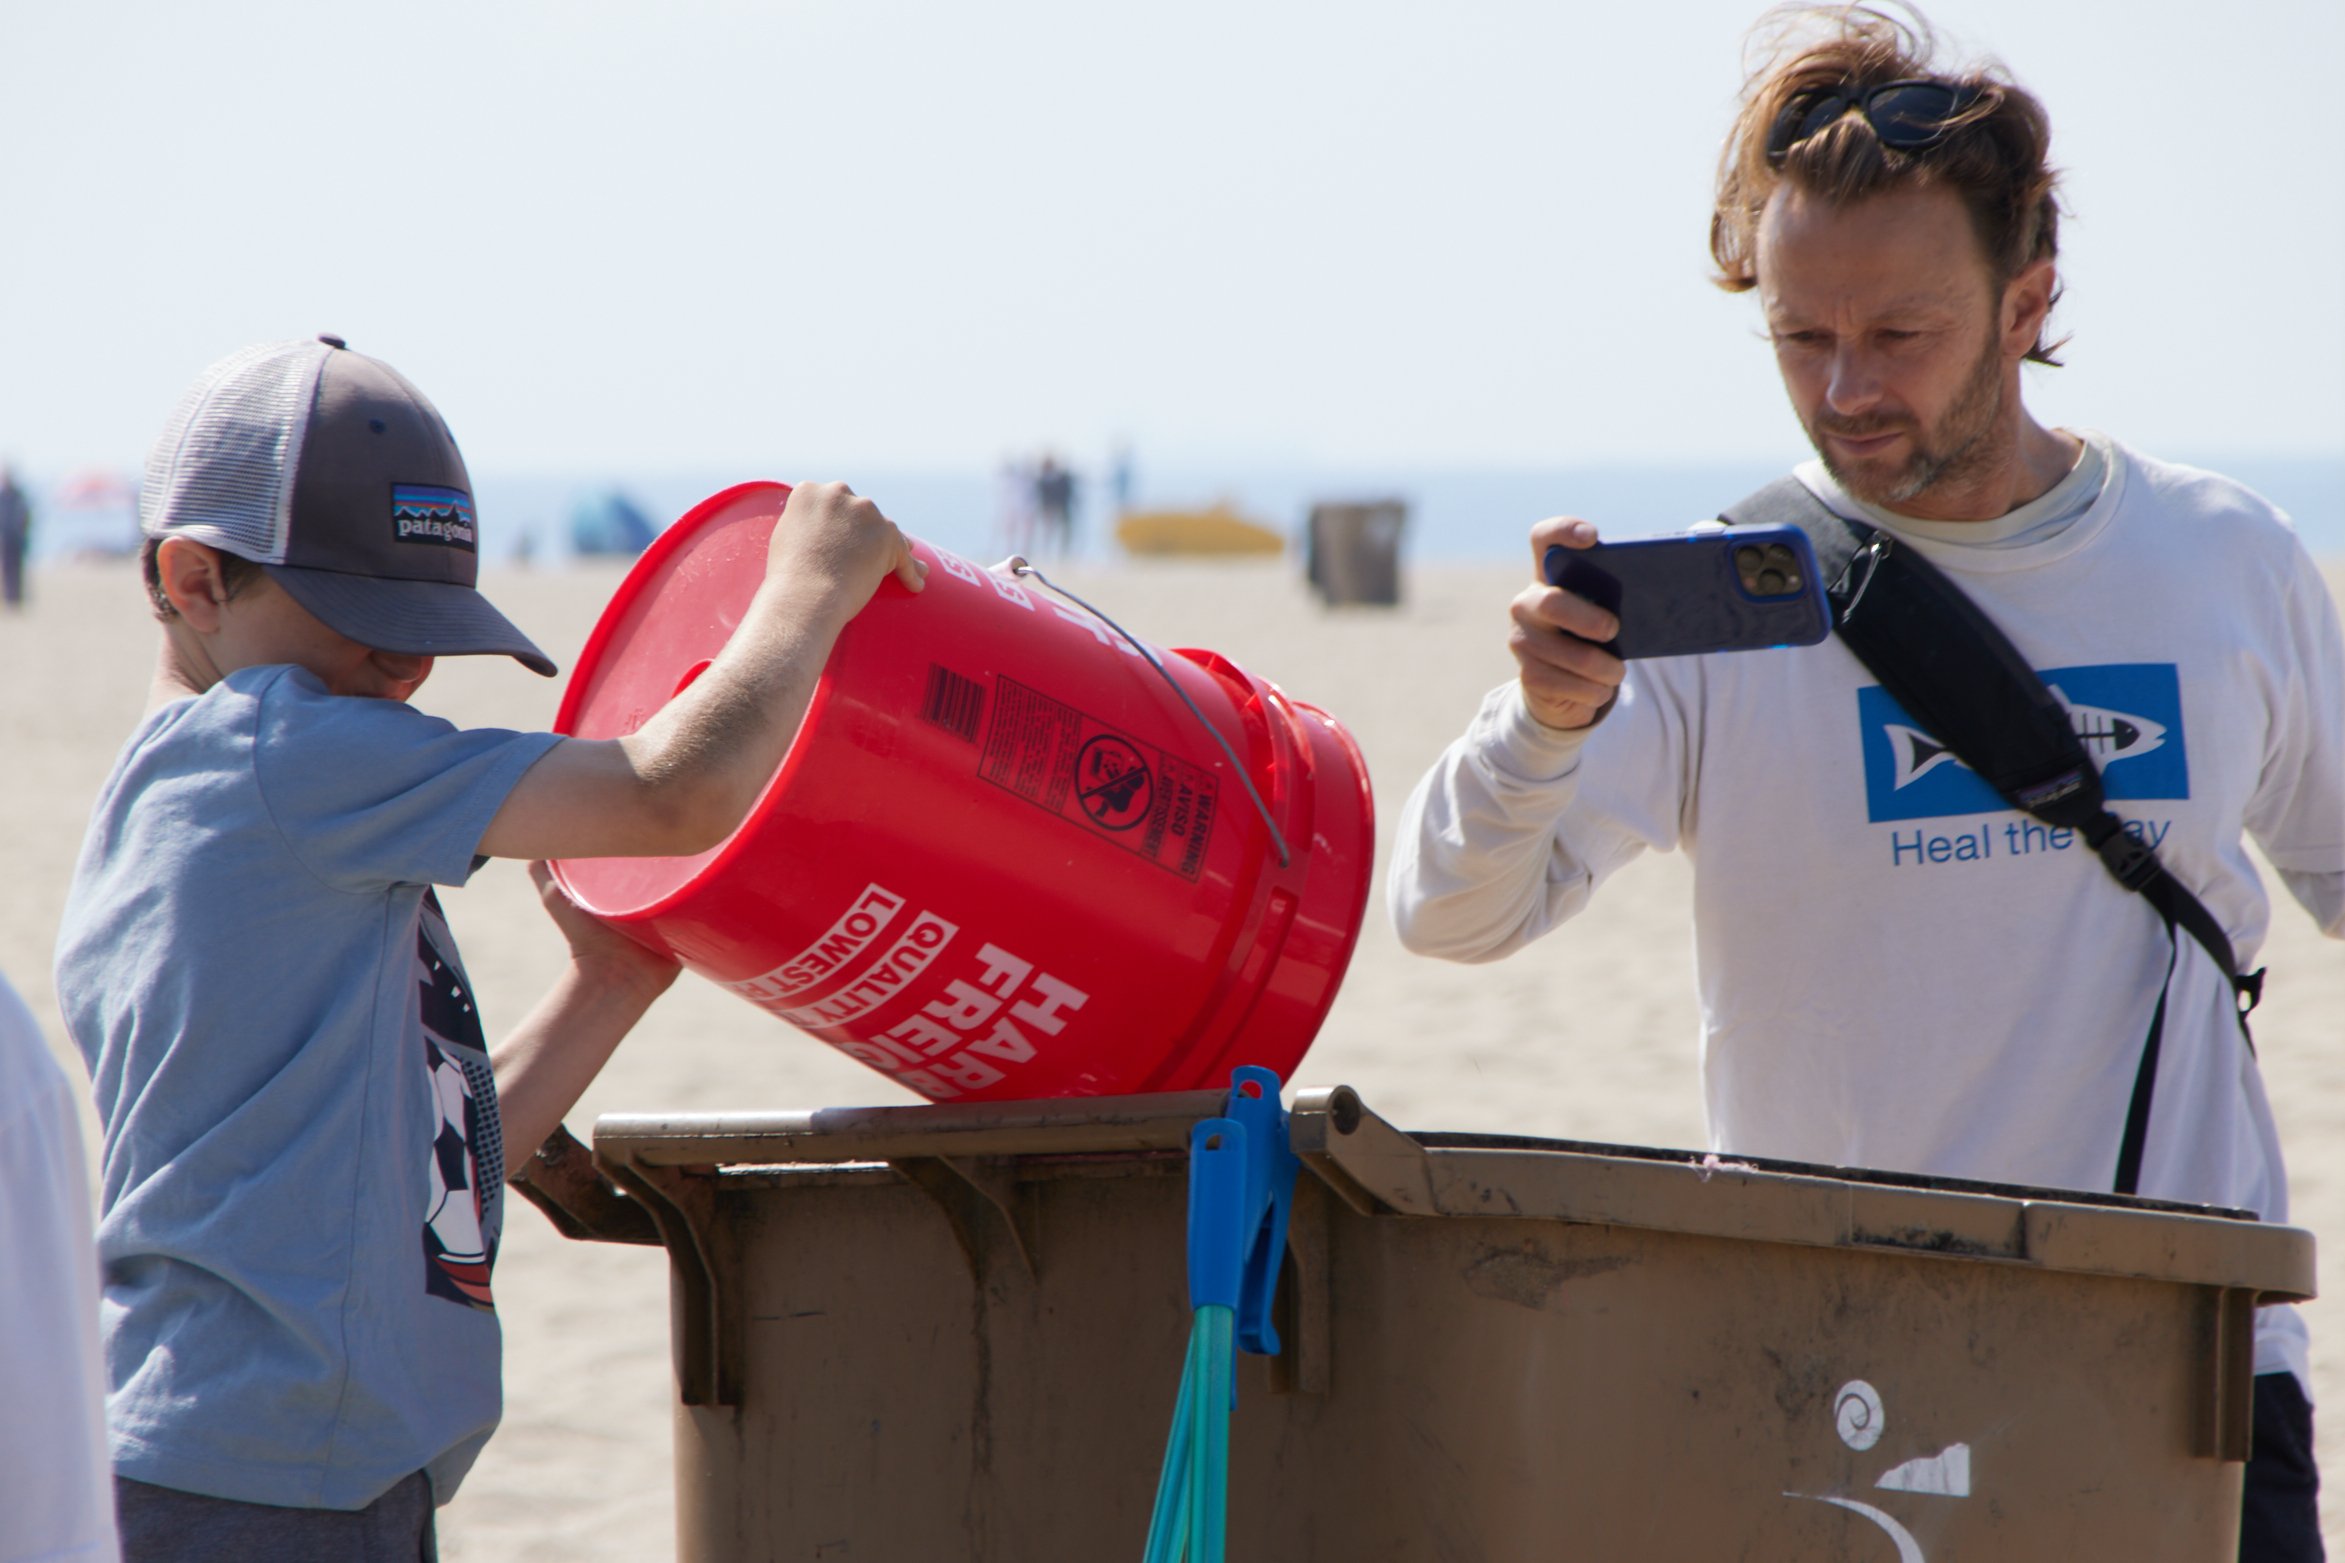  Marine biologist and professor at Santa Monica College (SMC) Benjamin Kay takes a video of his son Kody dumping a bucket full of collected trash into garbage bin during a coastal cleanup organized by SMC Sustainability Center at The Inkwell, Santa M